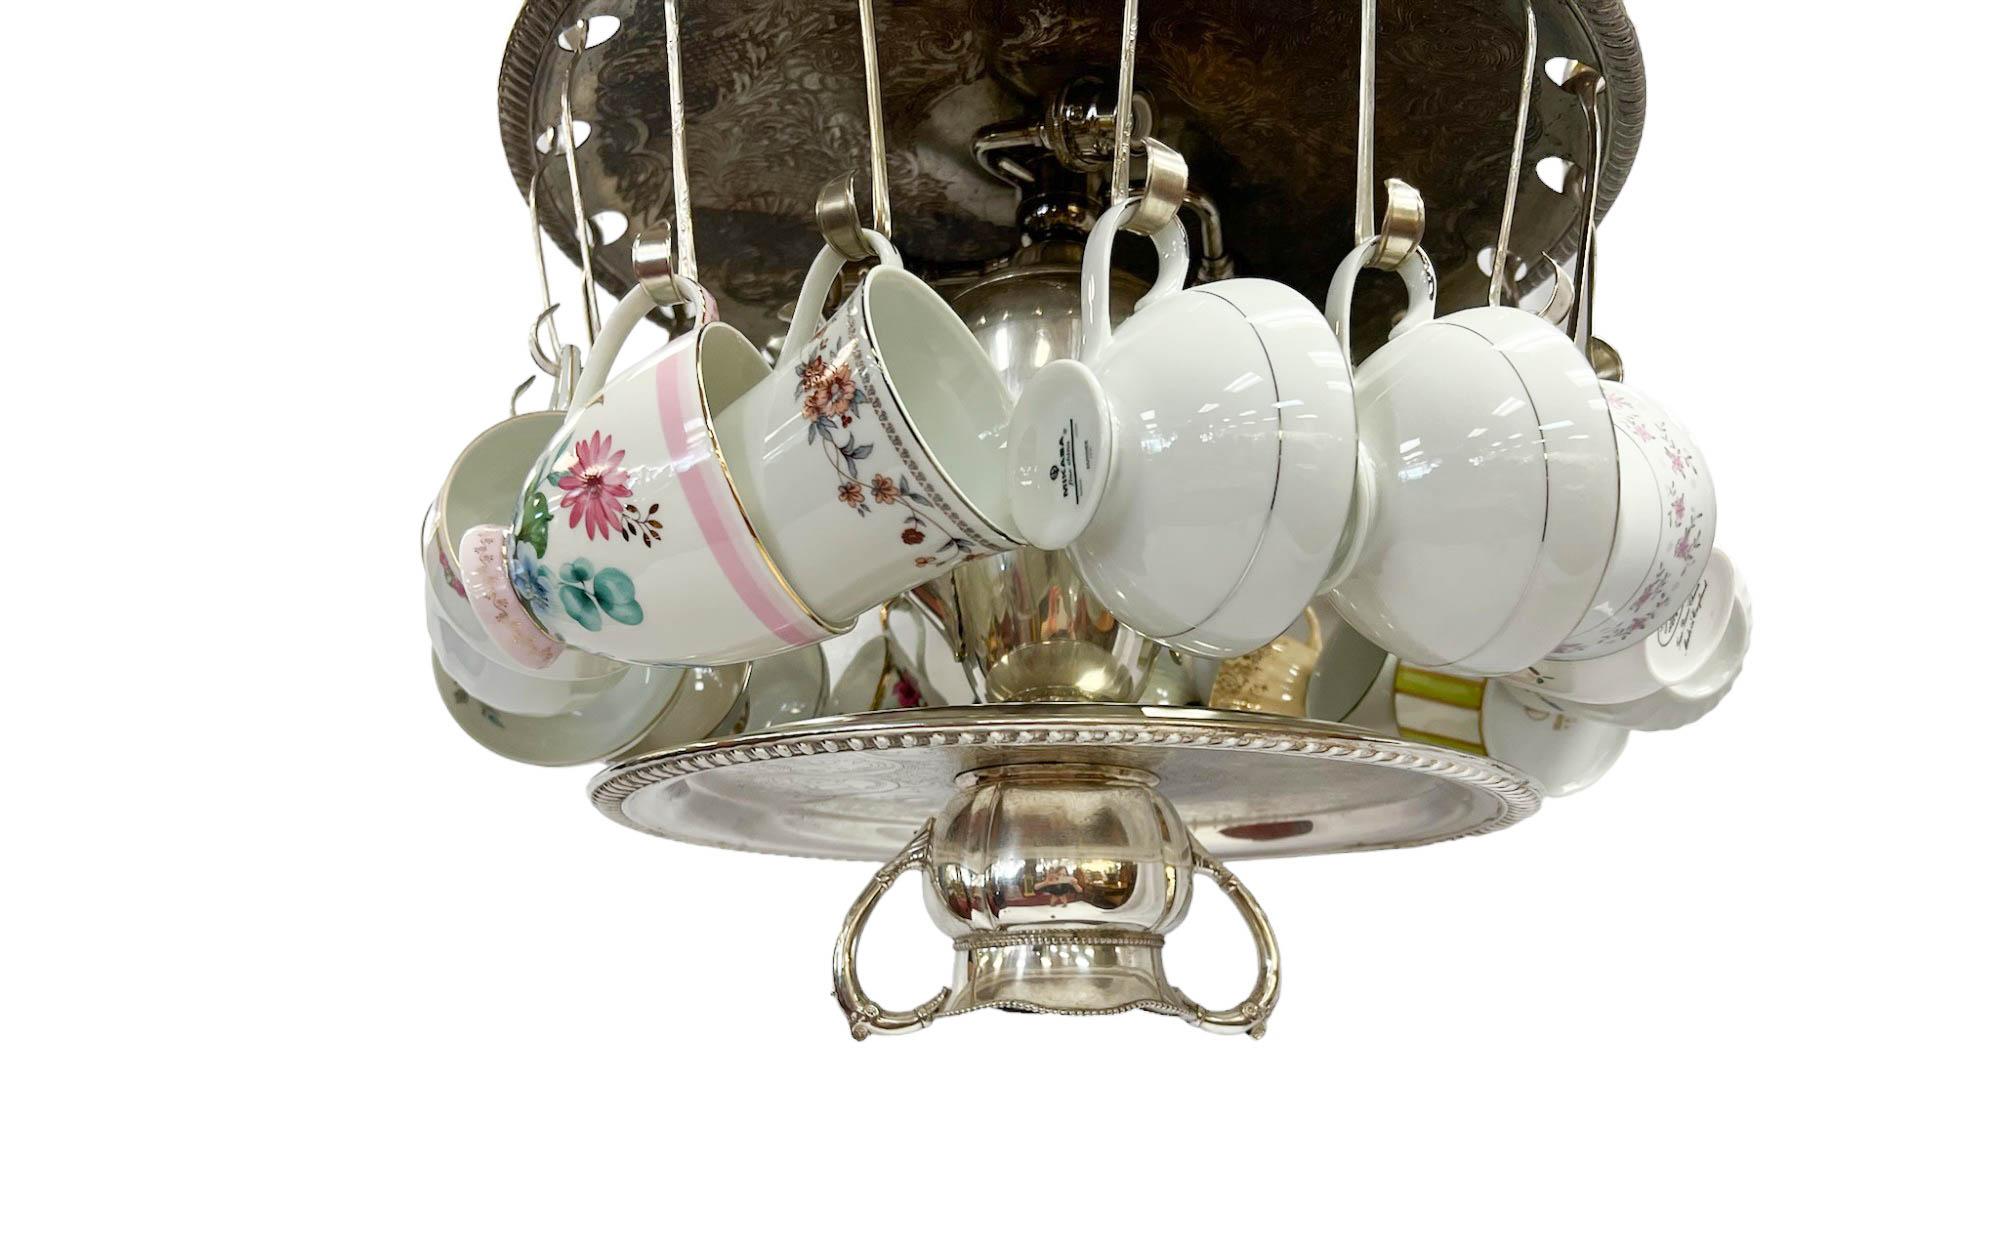 Vintage One-Of-A-Kind Handcrafted Teacup Chandelier In Good Condition For Sale In Palm Beach Gardens, FL